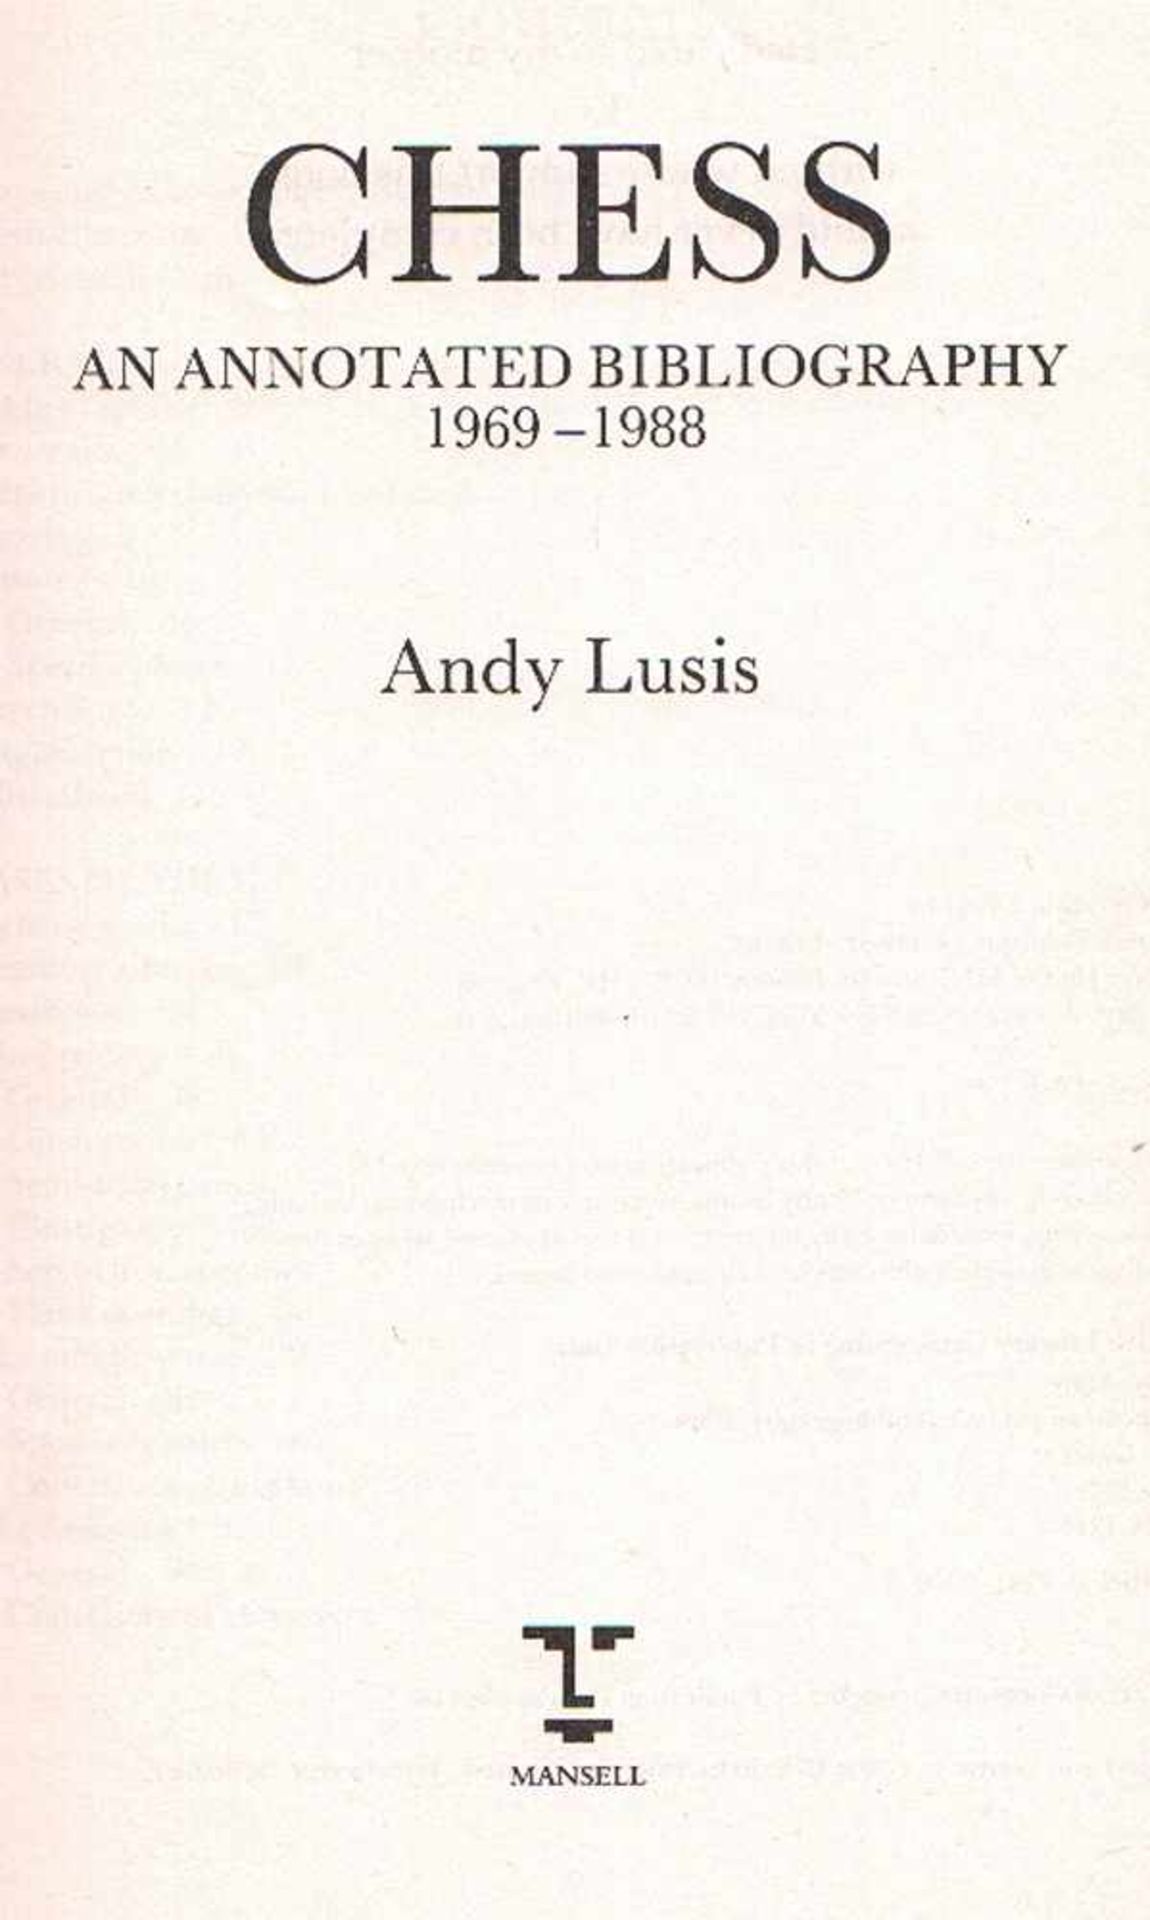 Lusis, Andy. Chess. An annotated bibliography 1969 - 1988. London und New York, Mansell, 1991. 4°.